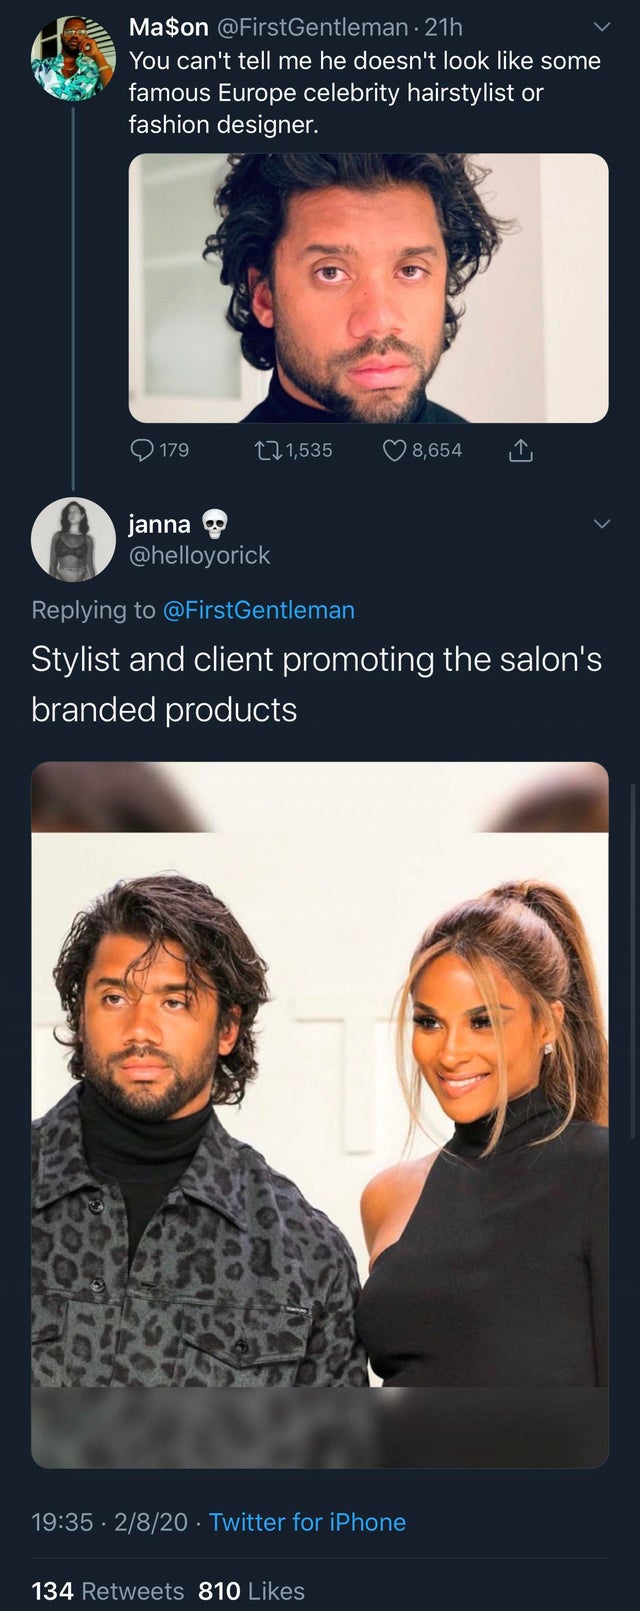 poster - Ma$on . 21h You can't tell me he doesn't look some famous Europe celebrity hairstylist or fashion designer. 179 1,535 8,654 1 janna Stylist and client promoting the salon's branded products 2820 Twitter for iPhone 134 810